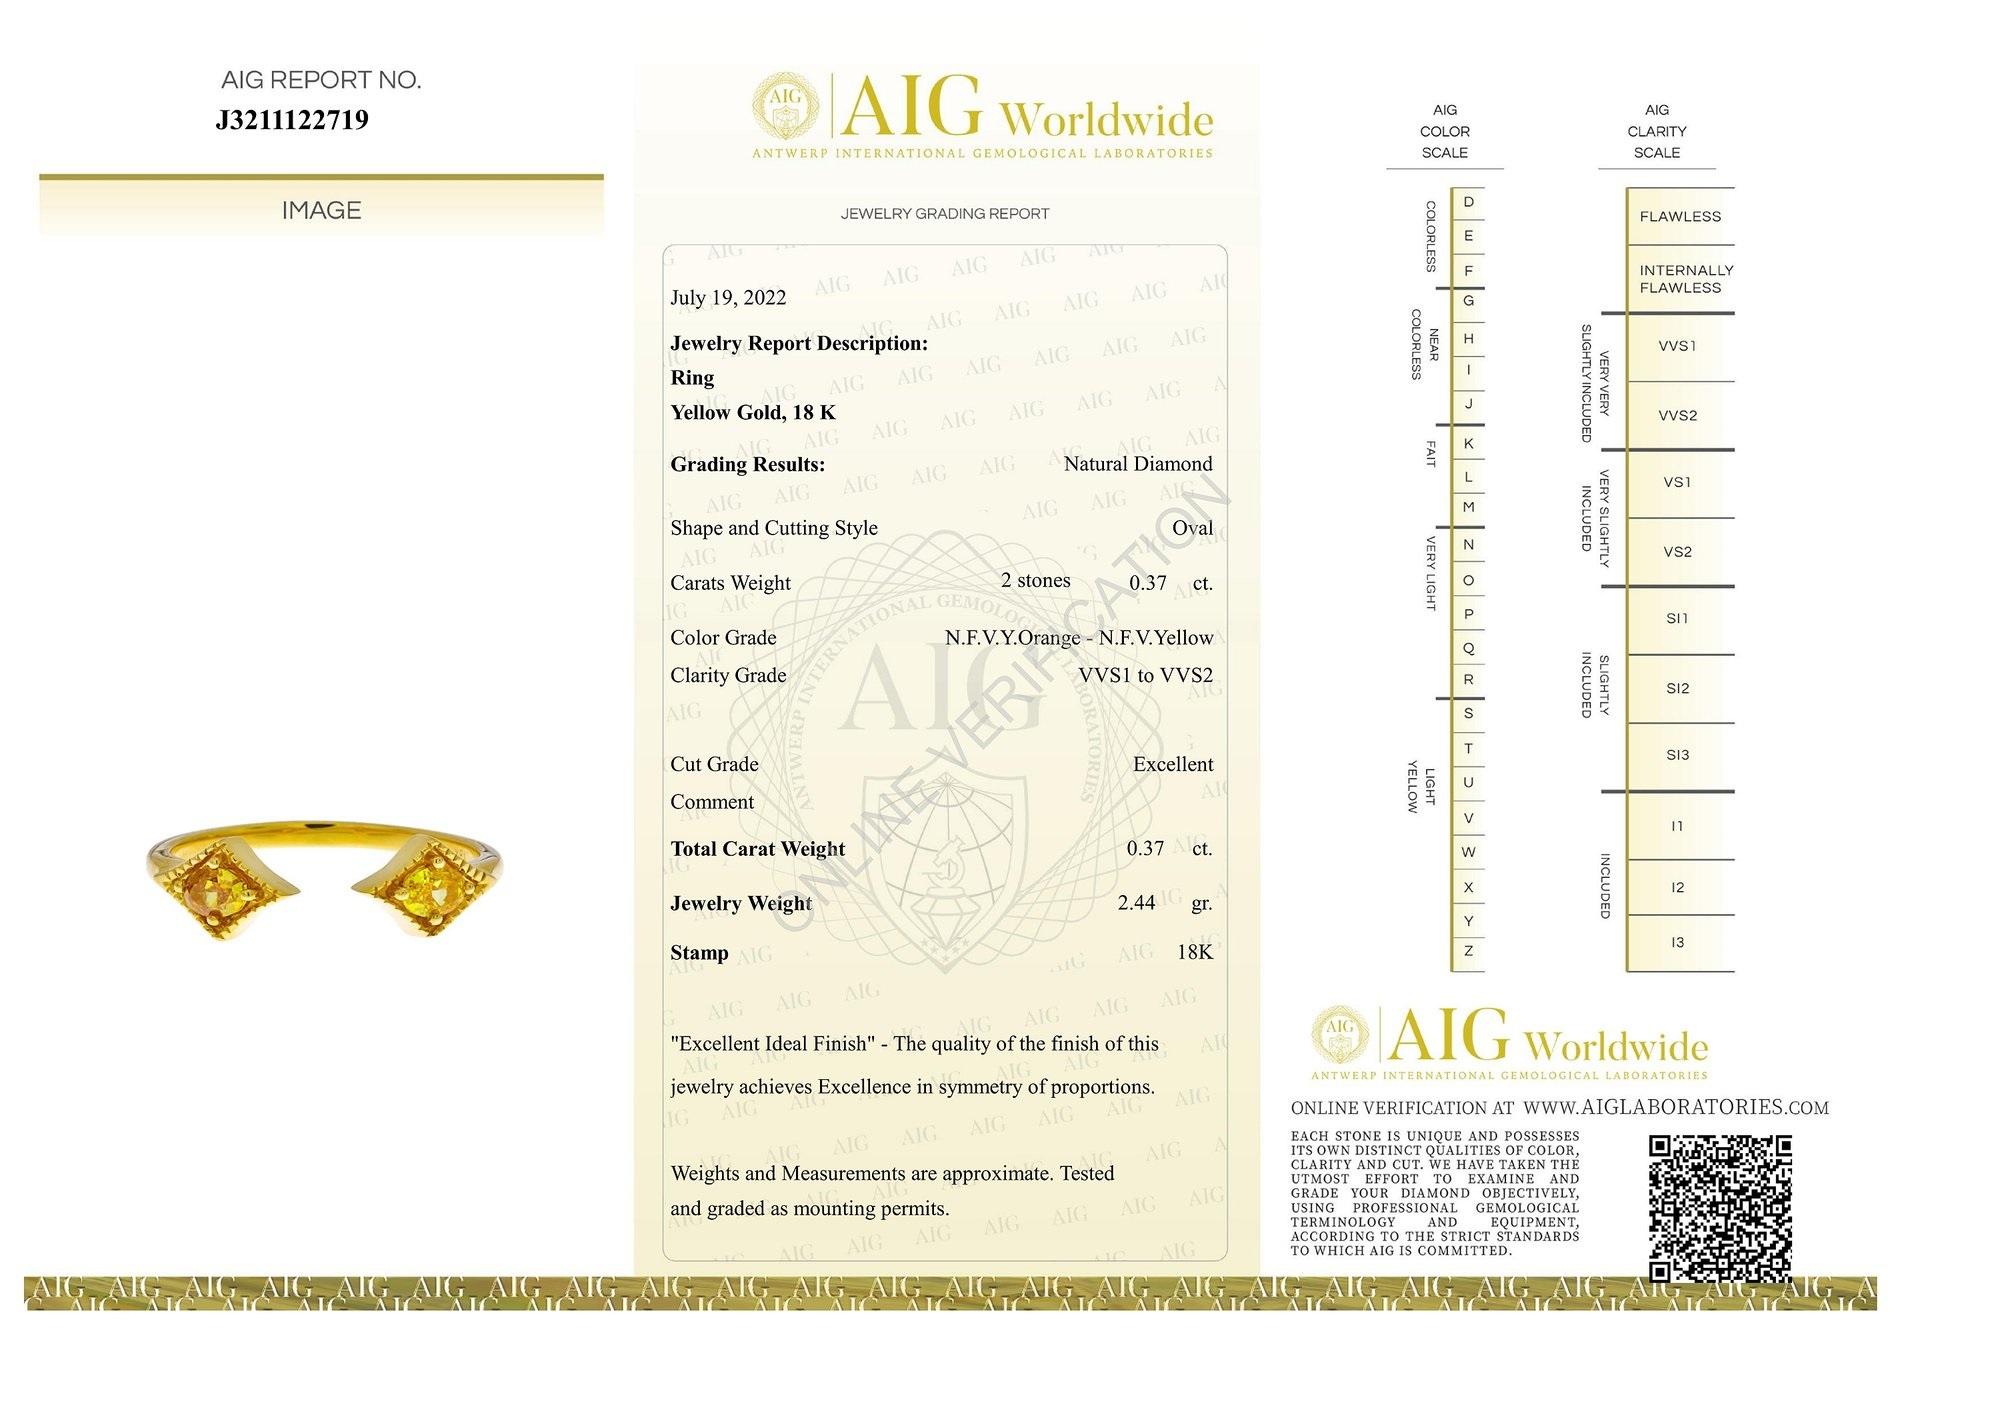 Stunning open ring made from 18k yellow gold with 0.37 total carat of fancy oval diamonds. This ring comes with an AIG certificate and a fancy box.

-1 diamond main stones of 0.185 ct. each, total: 0.37 ct.
cut: oval
color: natural fancy vivid